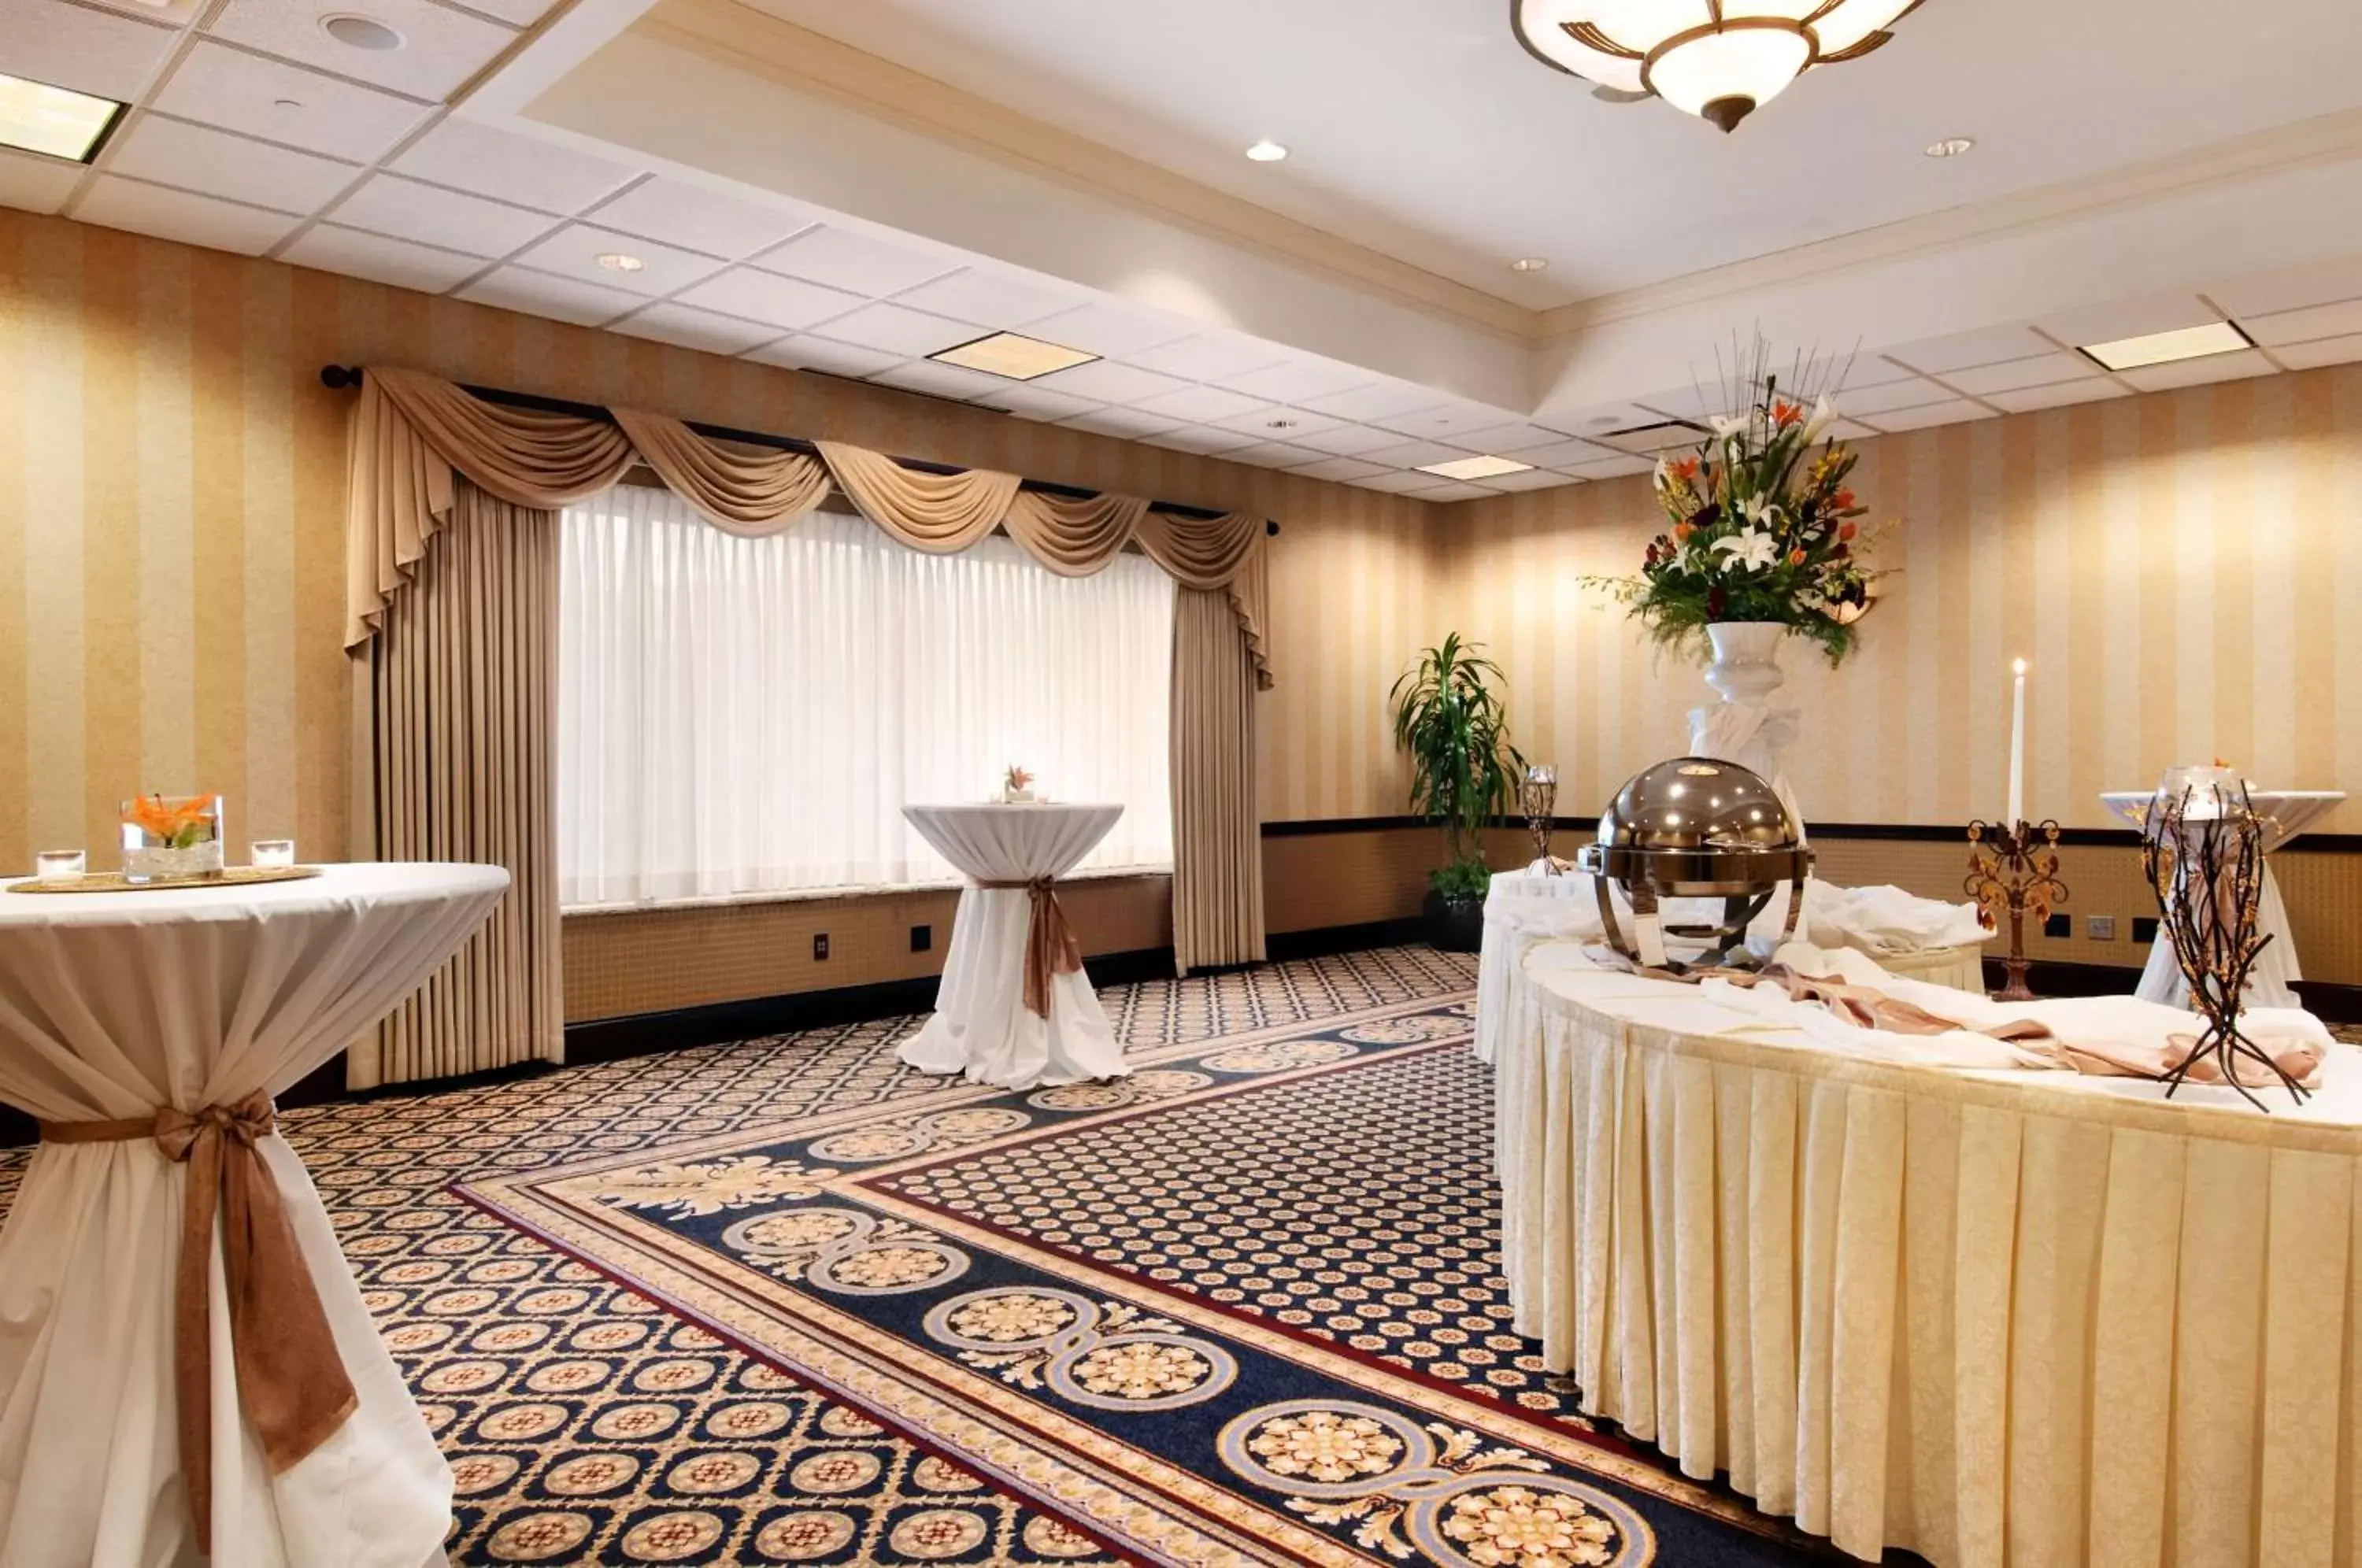 Meeting/conference room, Banquet Facilities in DoubleTree by Hilton Lisle Naperville